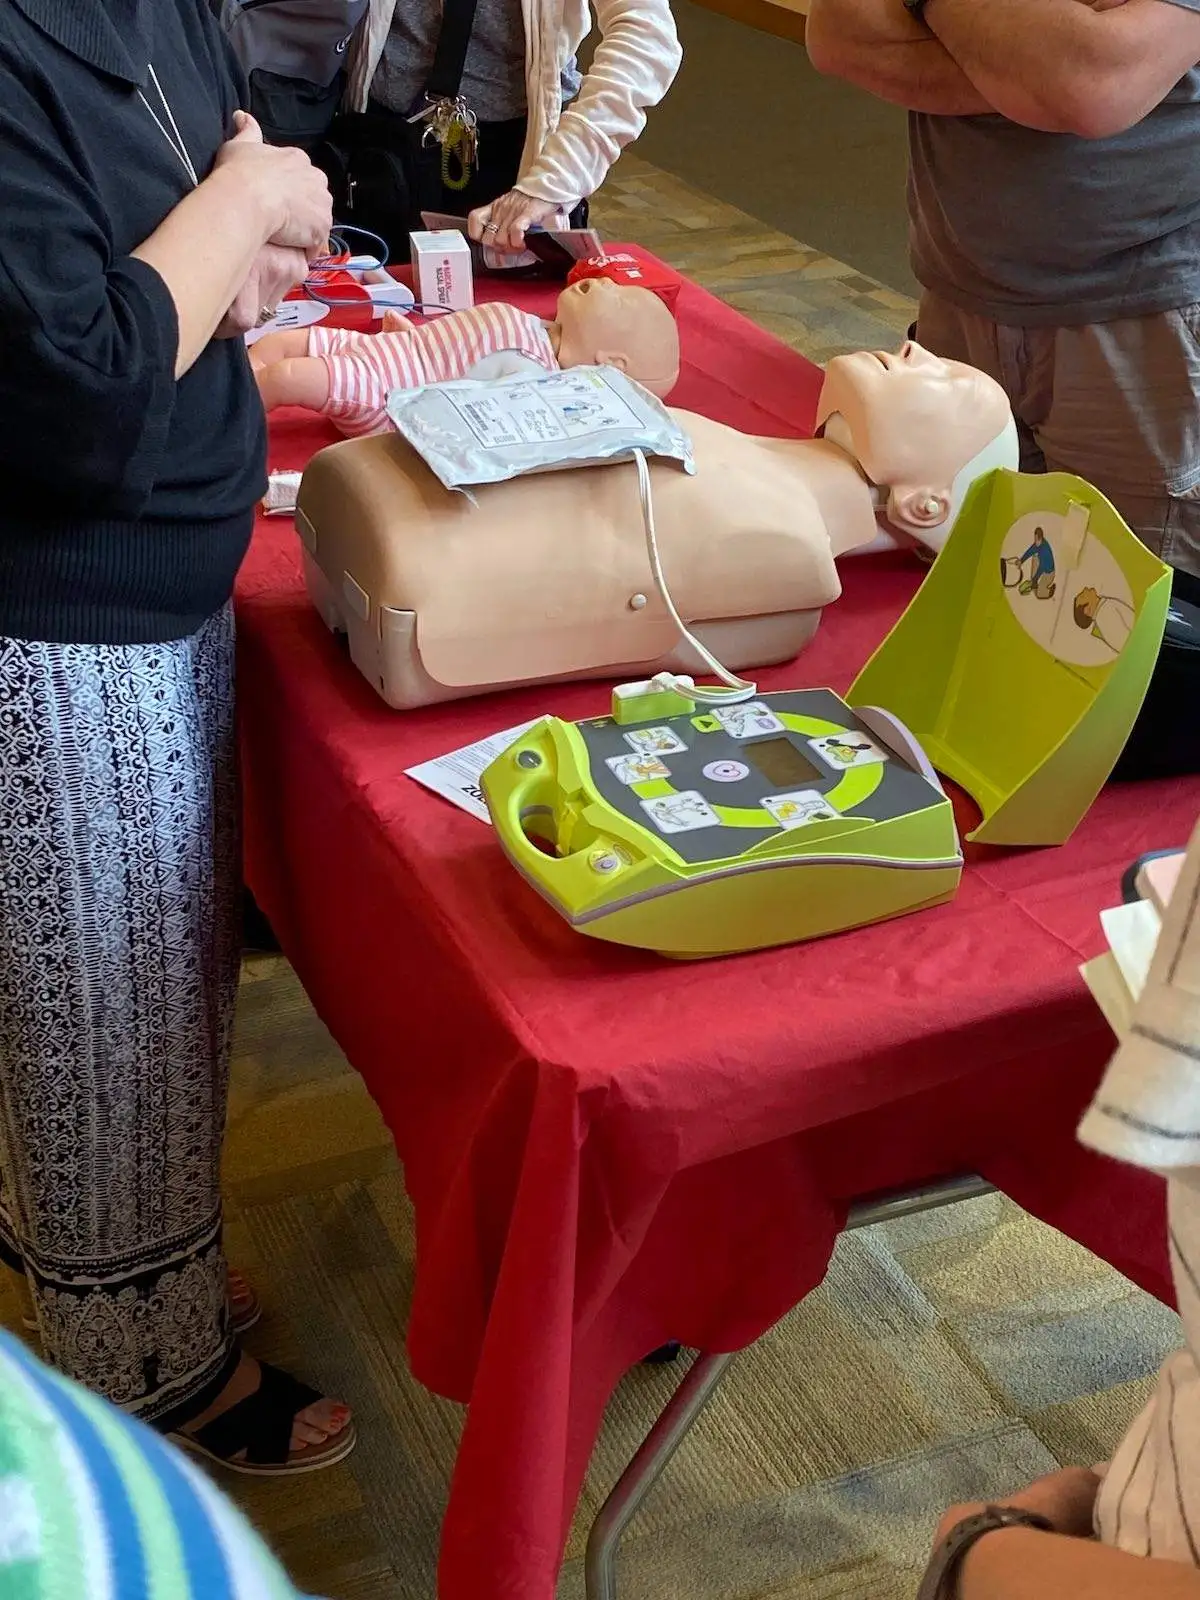 An AED sits open next to a dummy